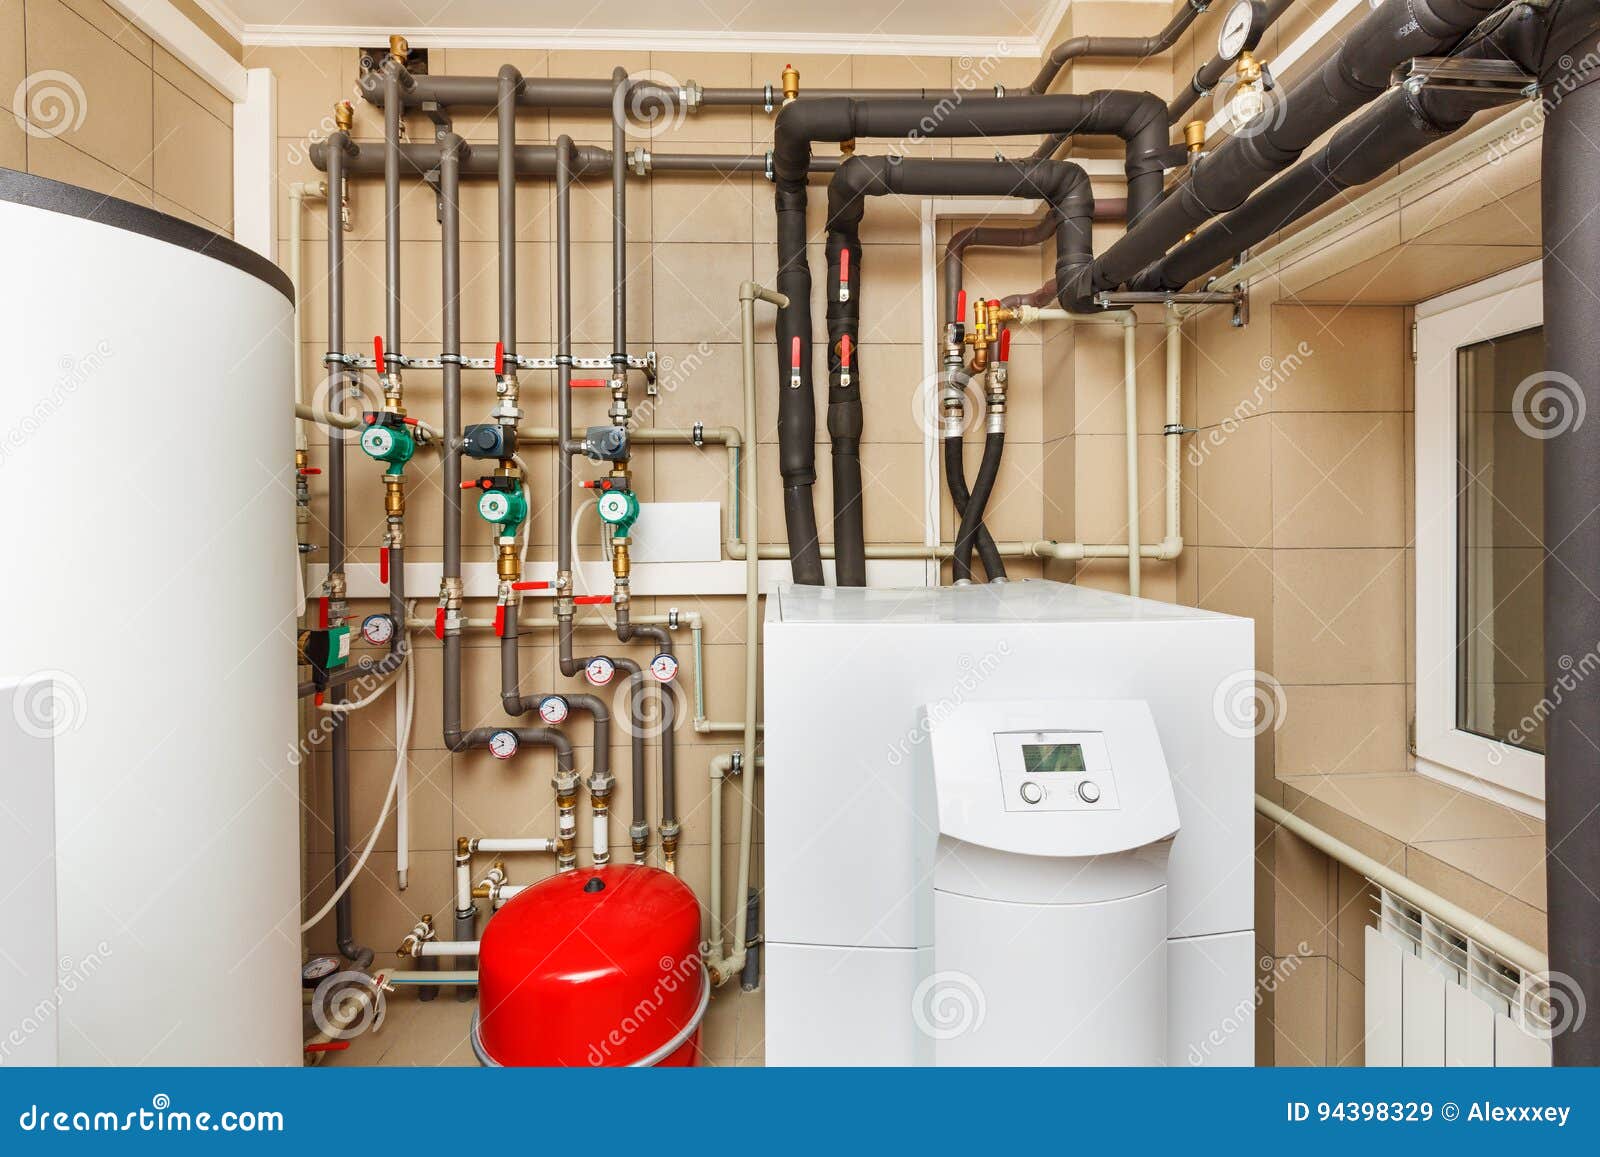 Household House with Heat Pump, Barrel; Valves; Sensors a Stock Image - Image of interior, pipelines: 94398329